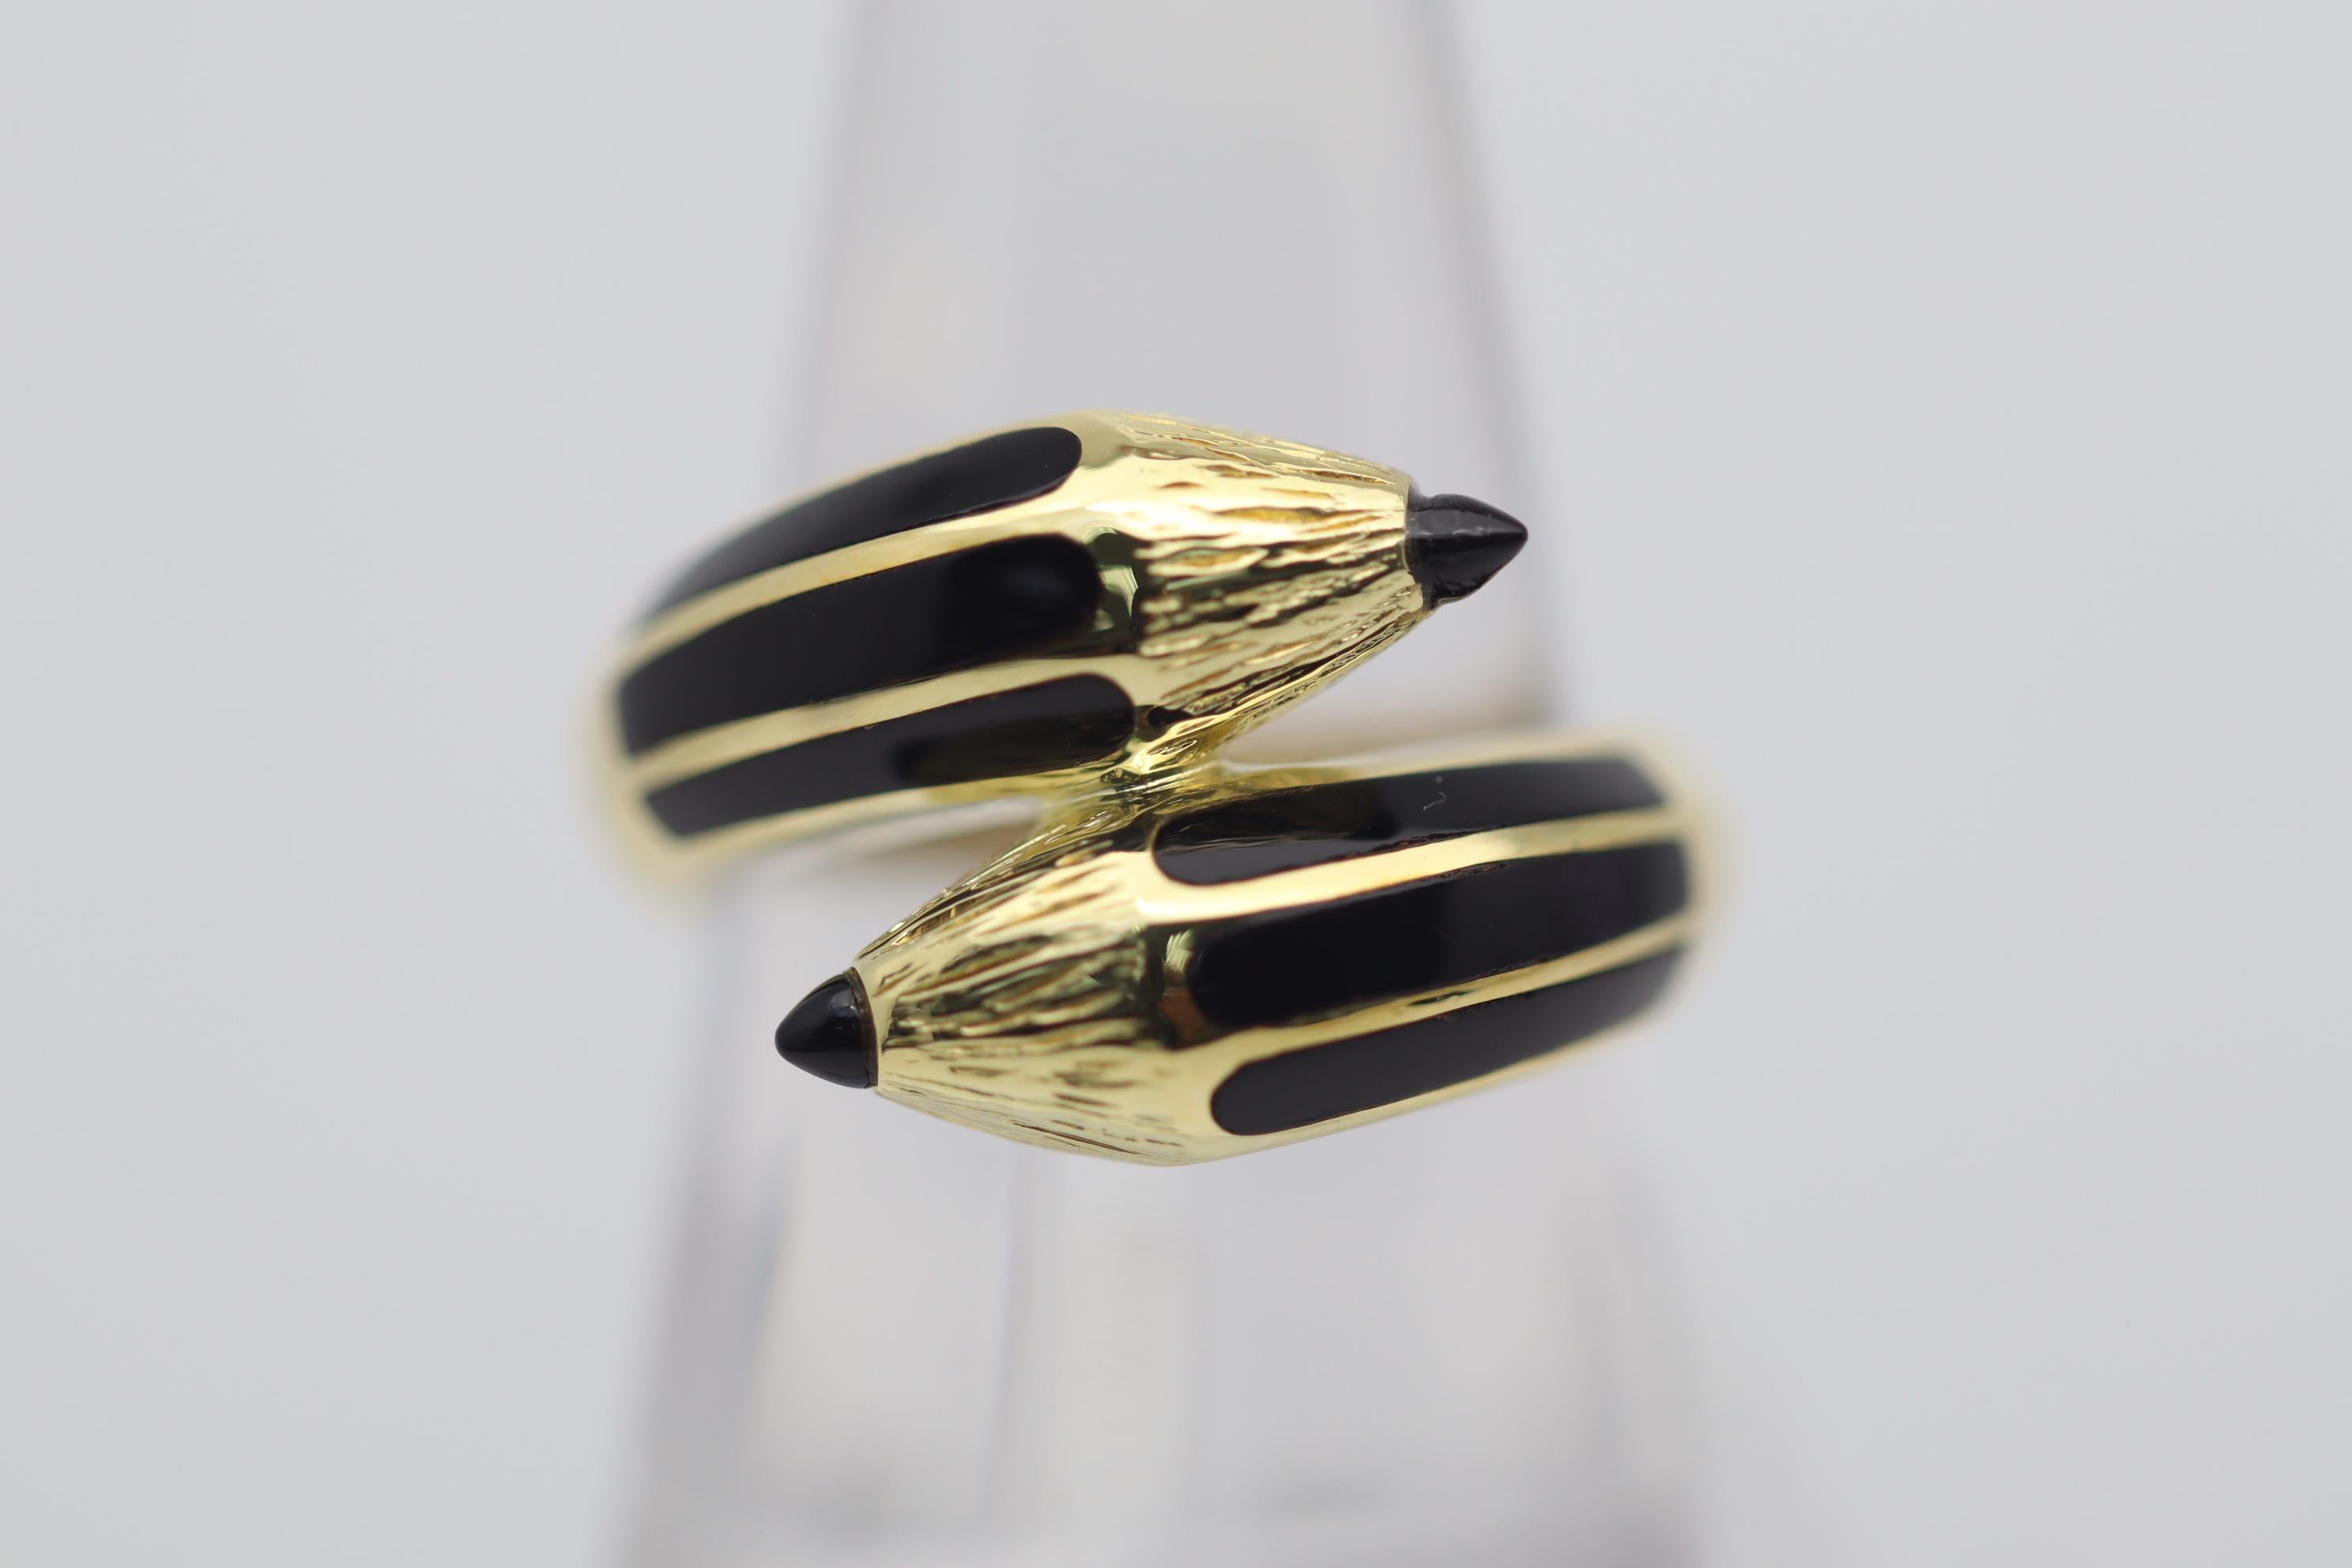 A sweet, fun and stylish ring designed as a double ended pencil! It is finely crafted in 18k yellow gold with hand-carved details making it appear lifelike. Adding to that, the pencil is enhanced with strips of black enamel and two pieces of onyx